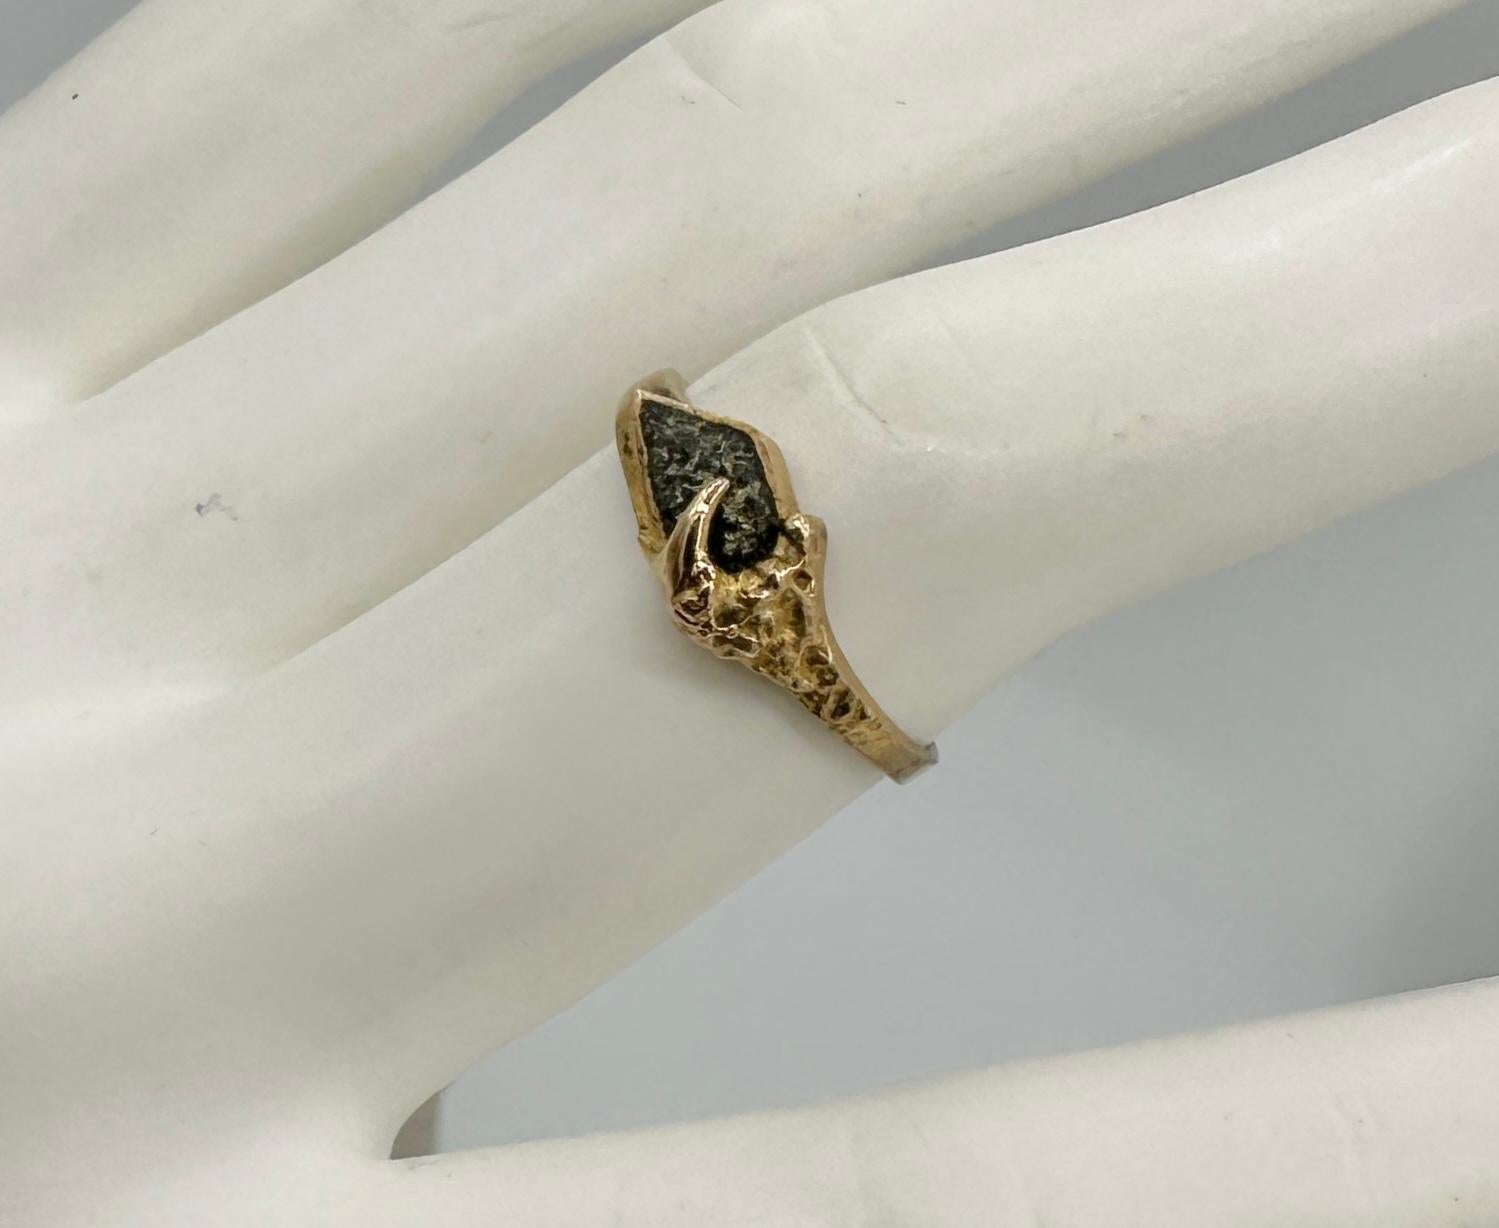 This is a rare Modernist Ring by Finnish jewelry designer Lapponia in 14 Karat Gold with a fabulous natural Calcite and a claw motif.  It is a beautiful piece of Scandinavian Mid-Century Modern jewelry.  The stunning natural Calcite gem with the